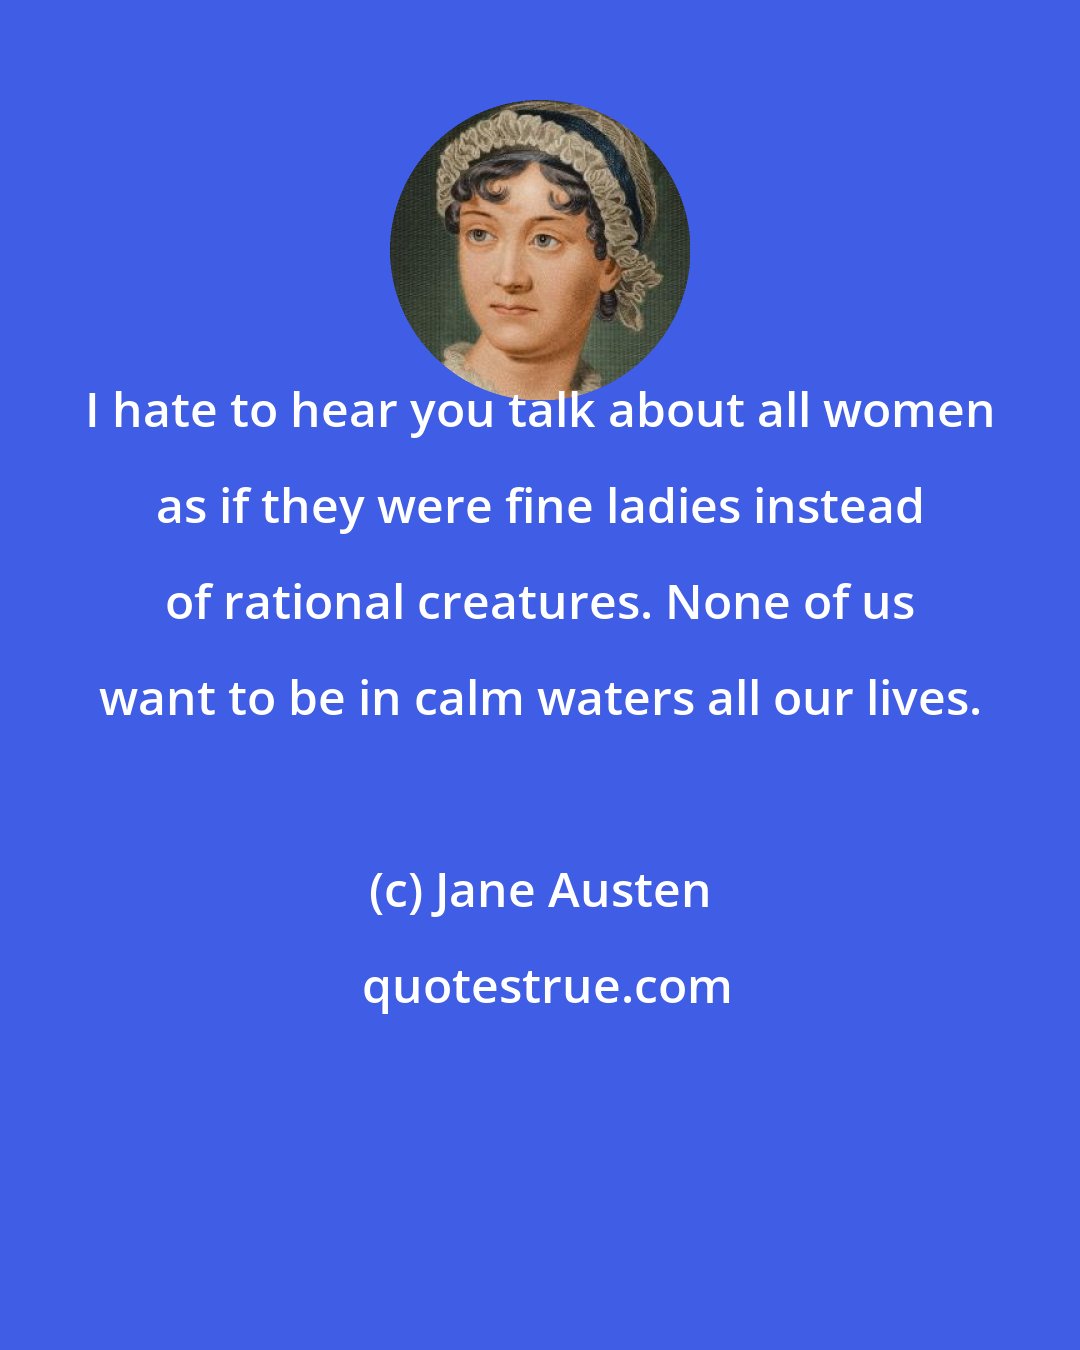 Jane Austen: I hate to hear you talk about all women as if they were fine ladies instead of rational creatures. None of us want to be in calm waters all our lives.